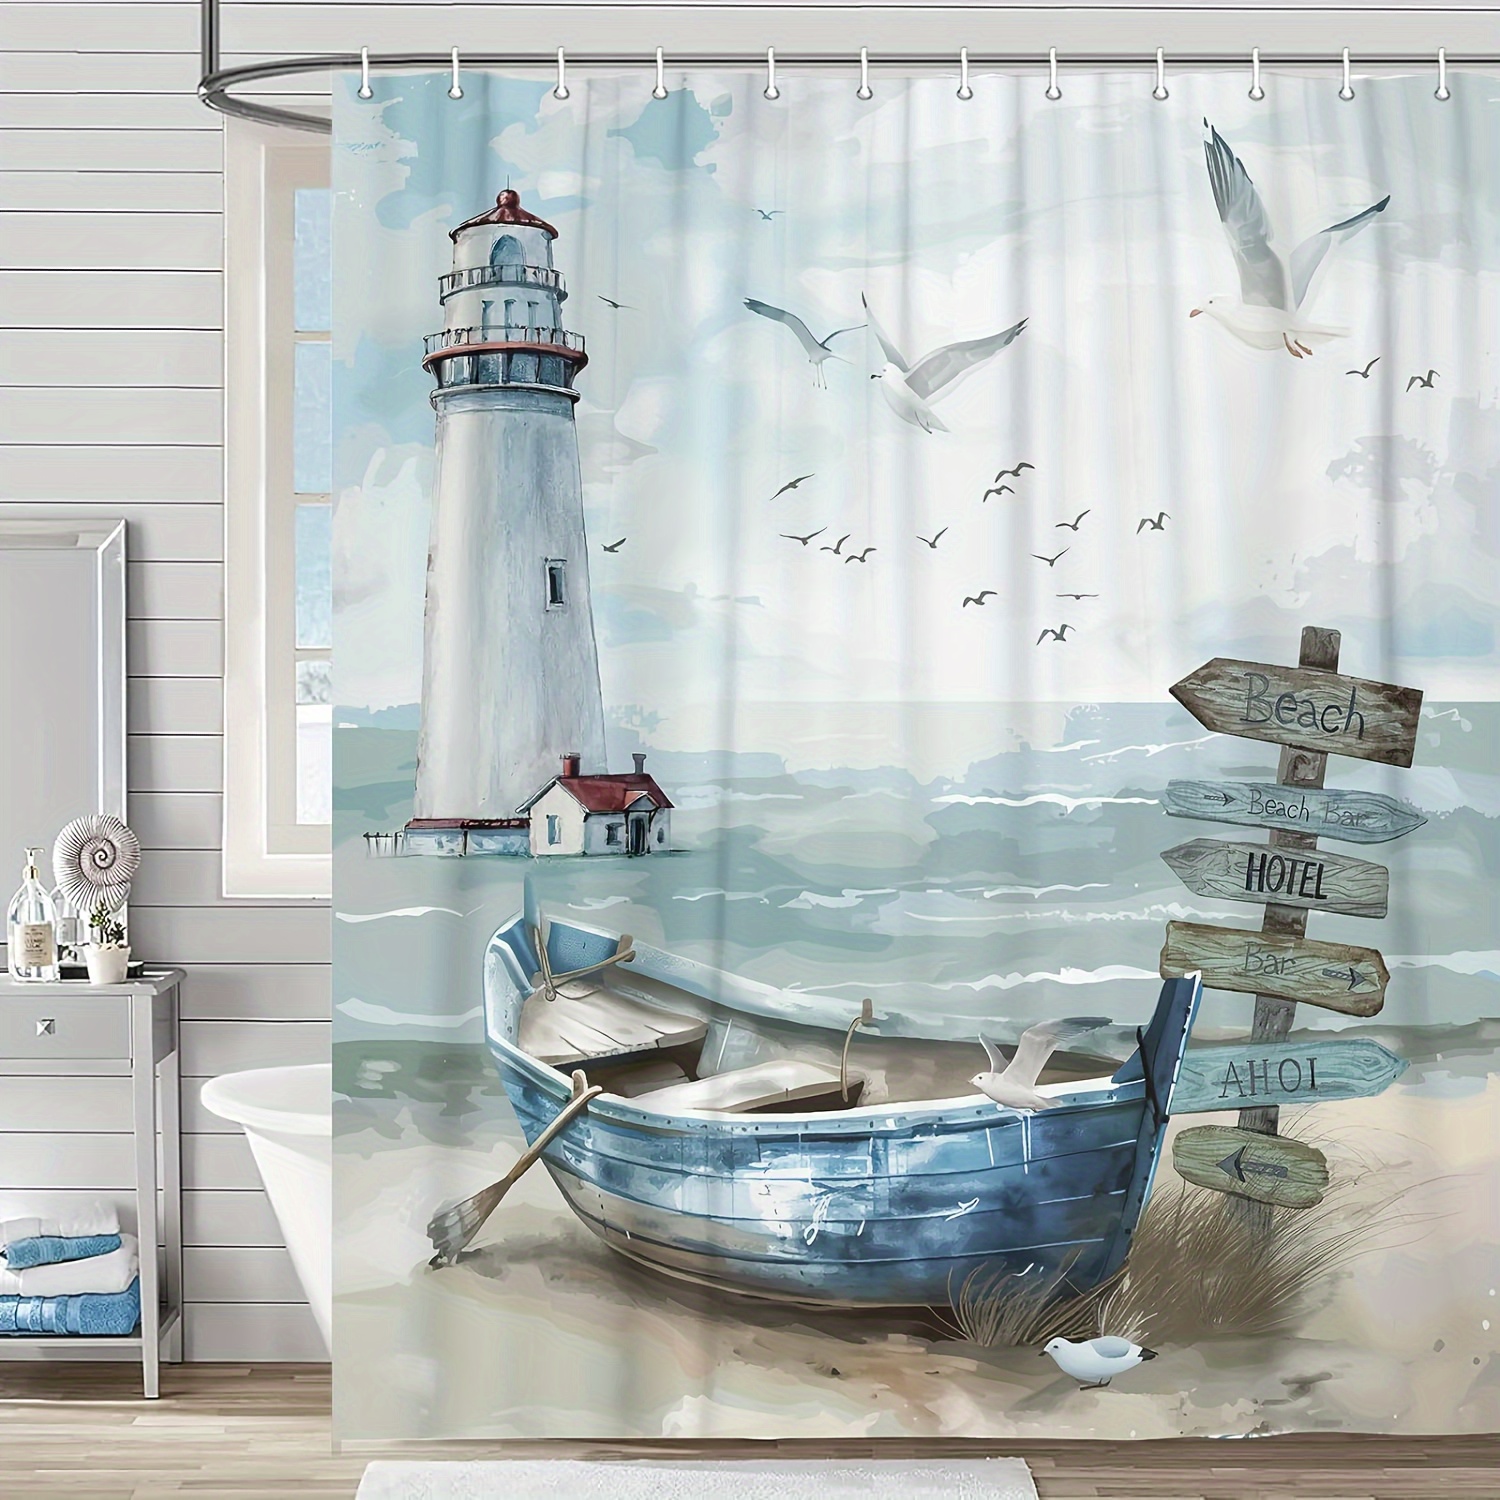 

Coastal Charm Shower Curtain Set - Ocean Beach & Lighthouse Design, Waterproof Polyester With Hooks Included, Perfect For Bathroom Decor